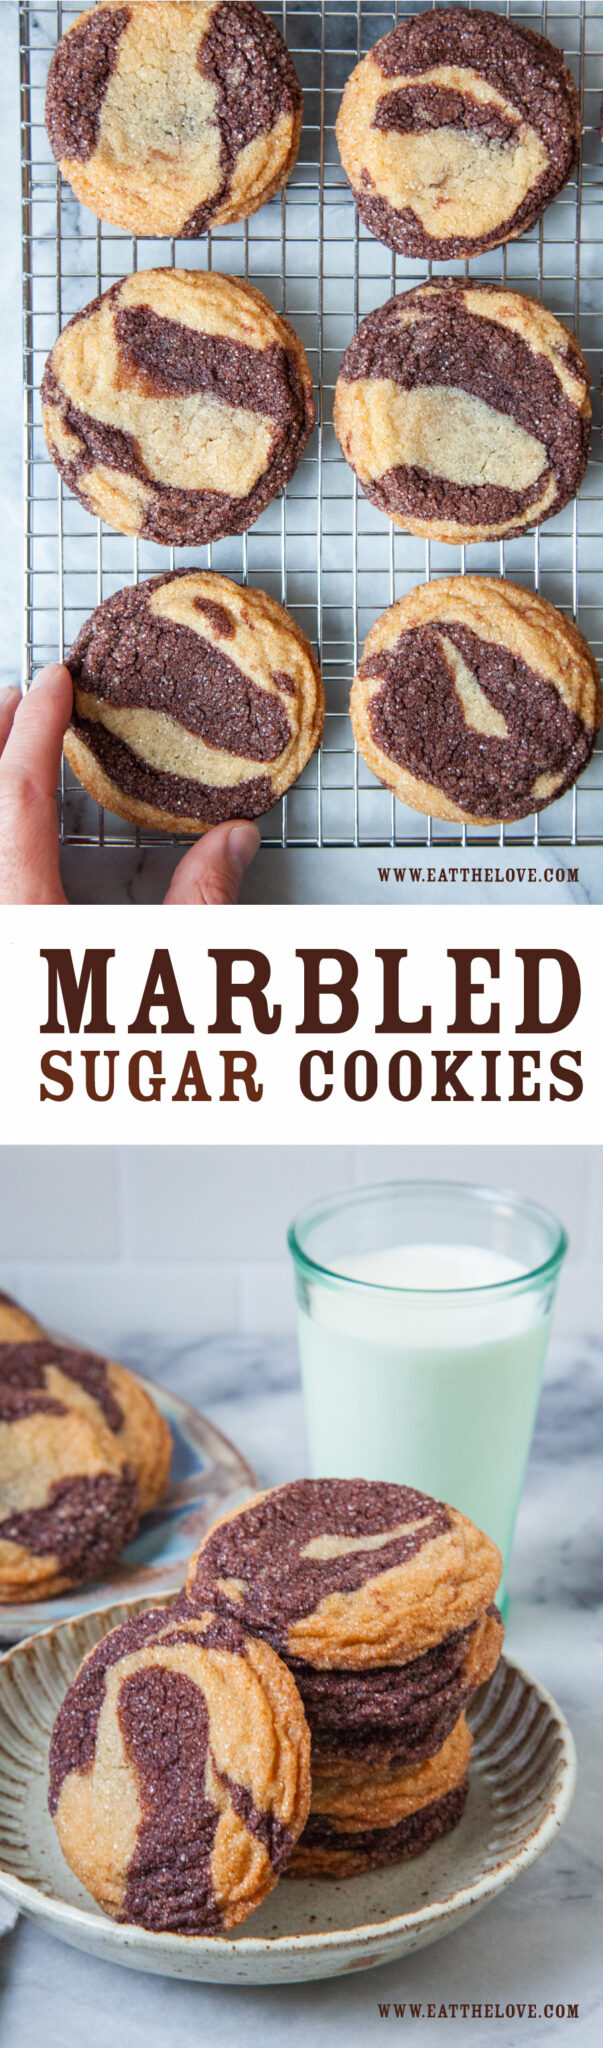 Top image is a hand reaching for marbled sugar cookies on a wire cooling rack. Bottom image is a stack of marbled sugar cookies on a plate, with more cookies and a glass of milk behind it. The text on the image says Marbled Sugar Cookies.